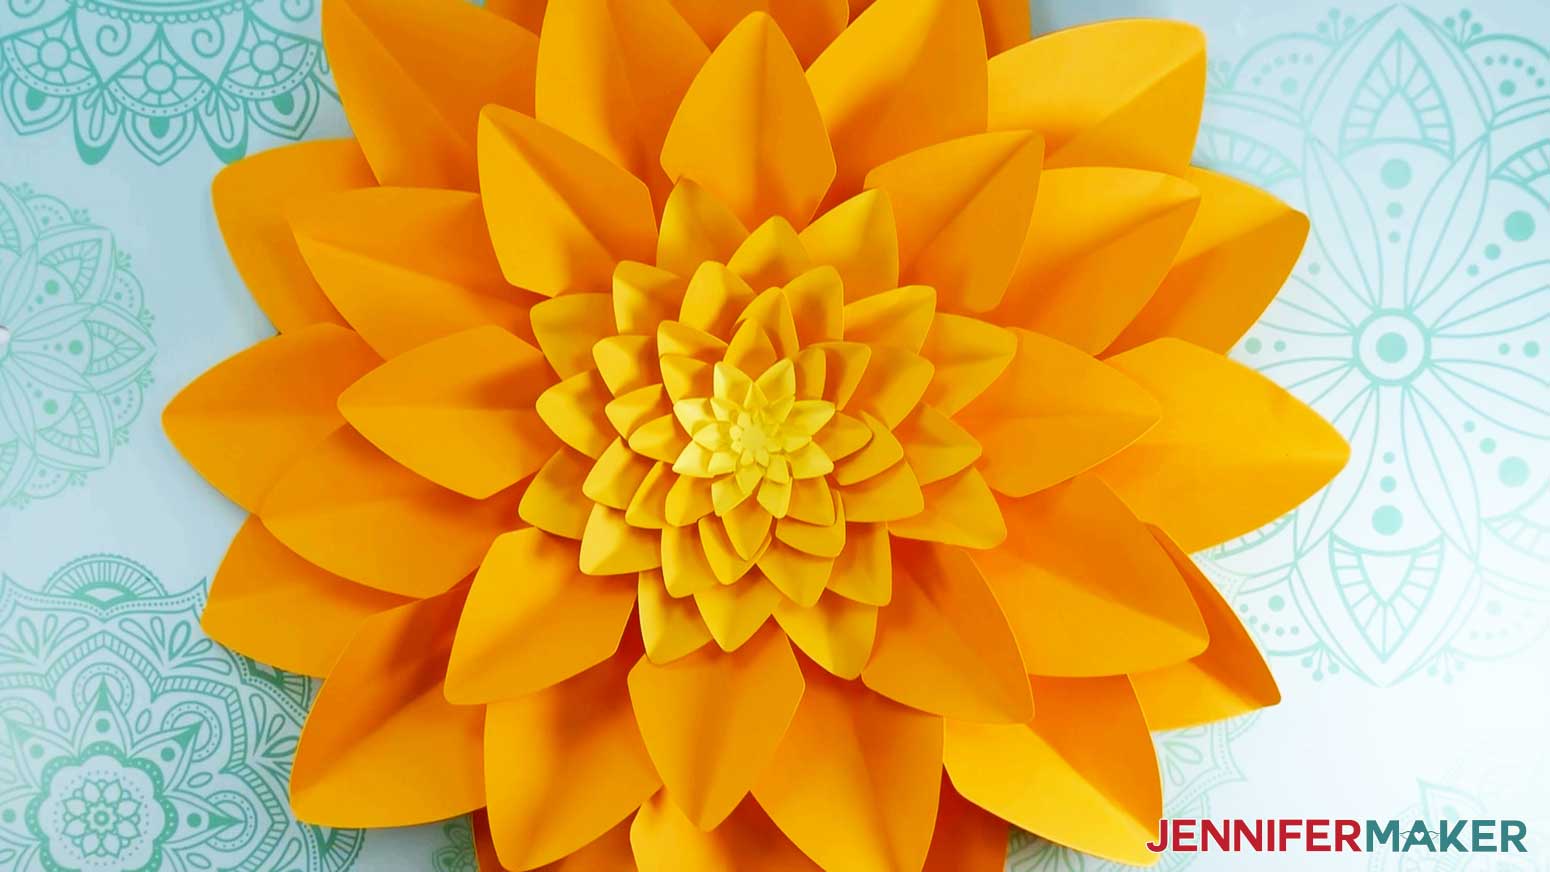 Image of assembled 18.5 inch broad petal Giant Paper Dahlia